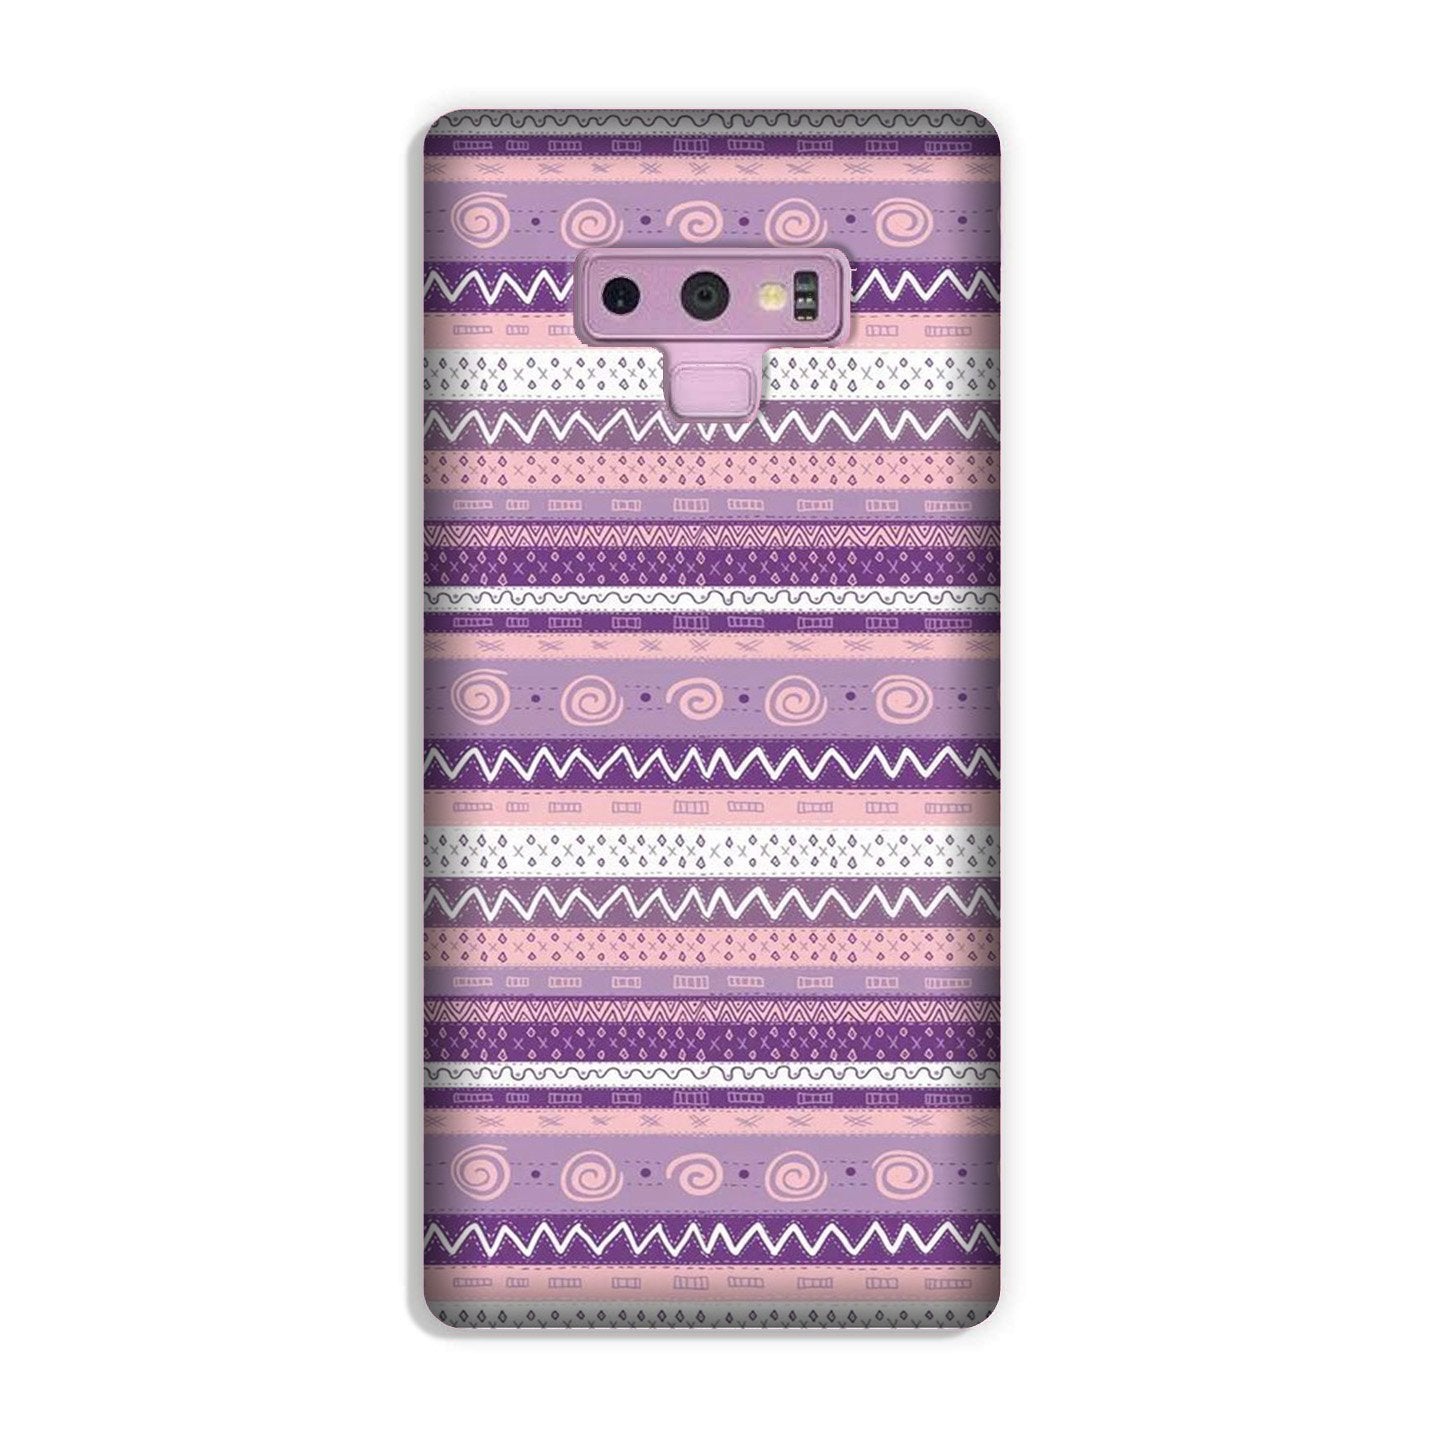 Zigzag line pattern3 Case for Galaxy Note 9